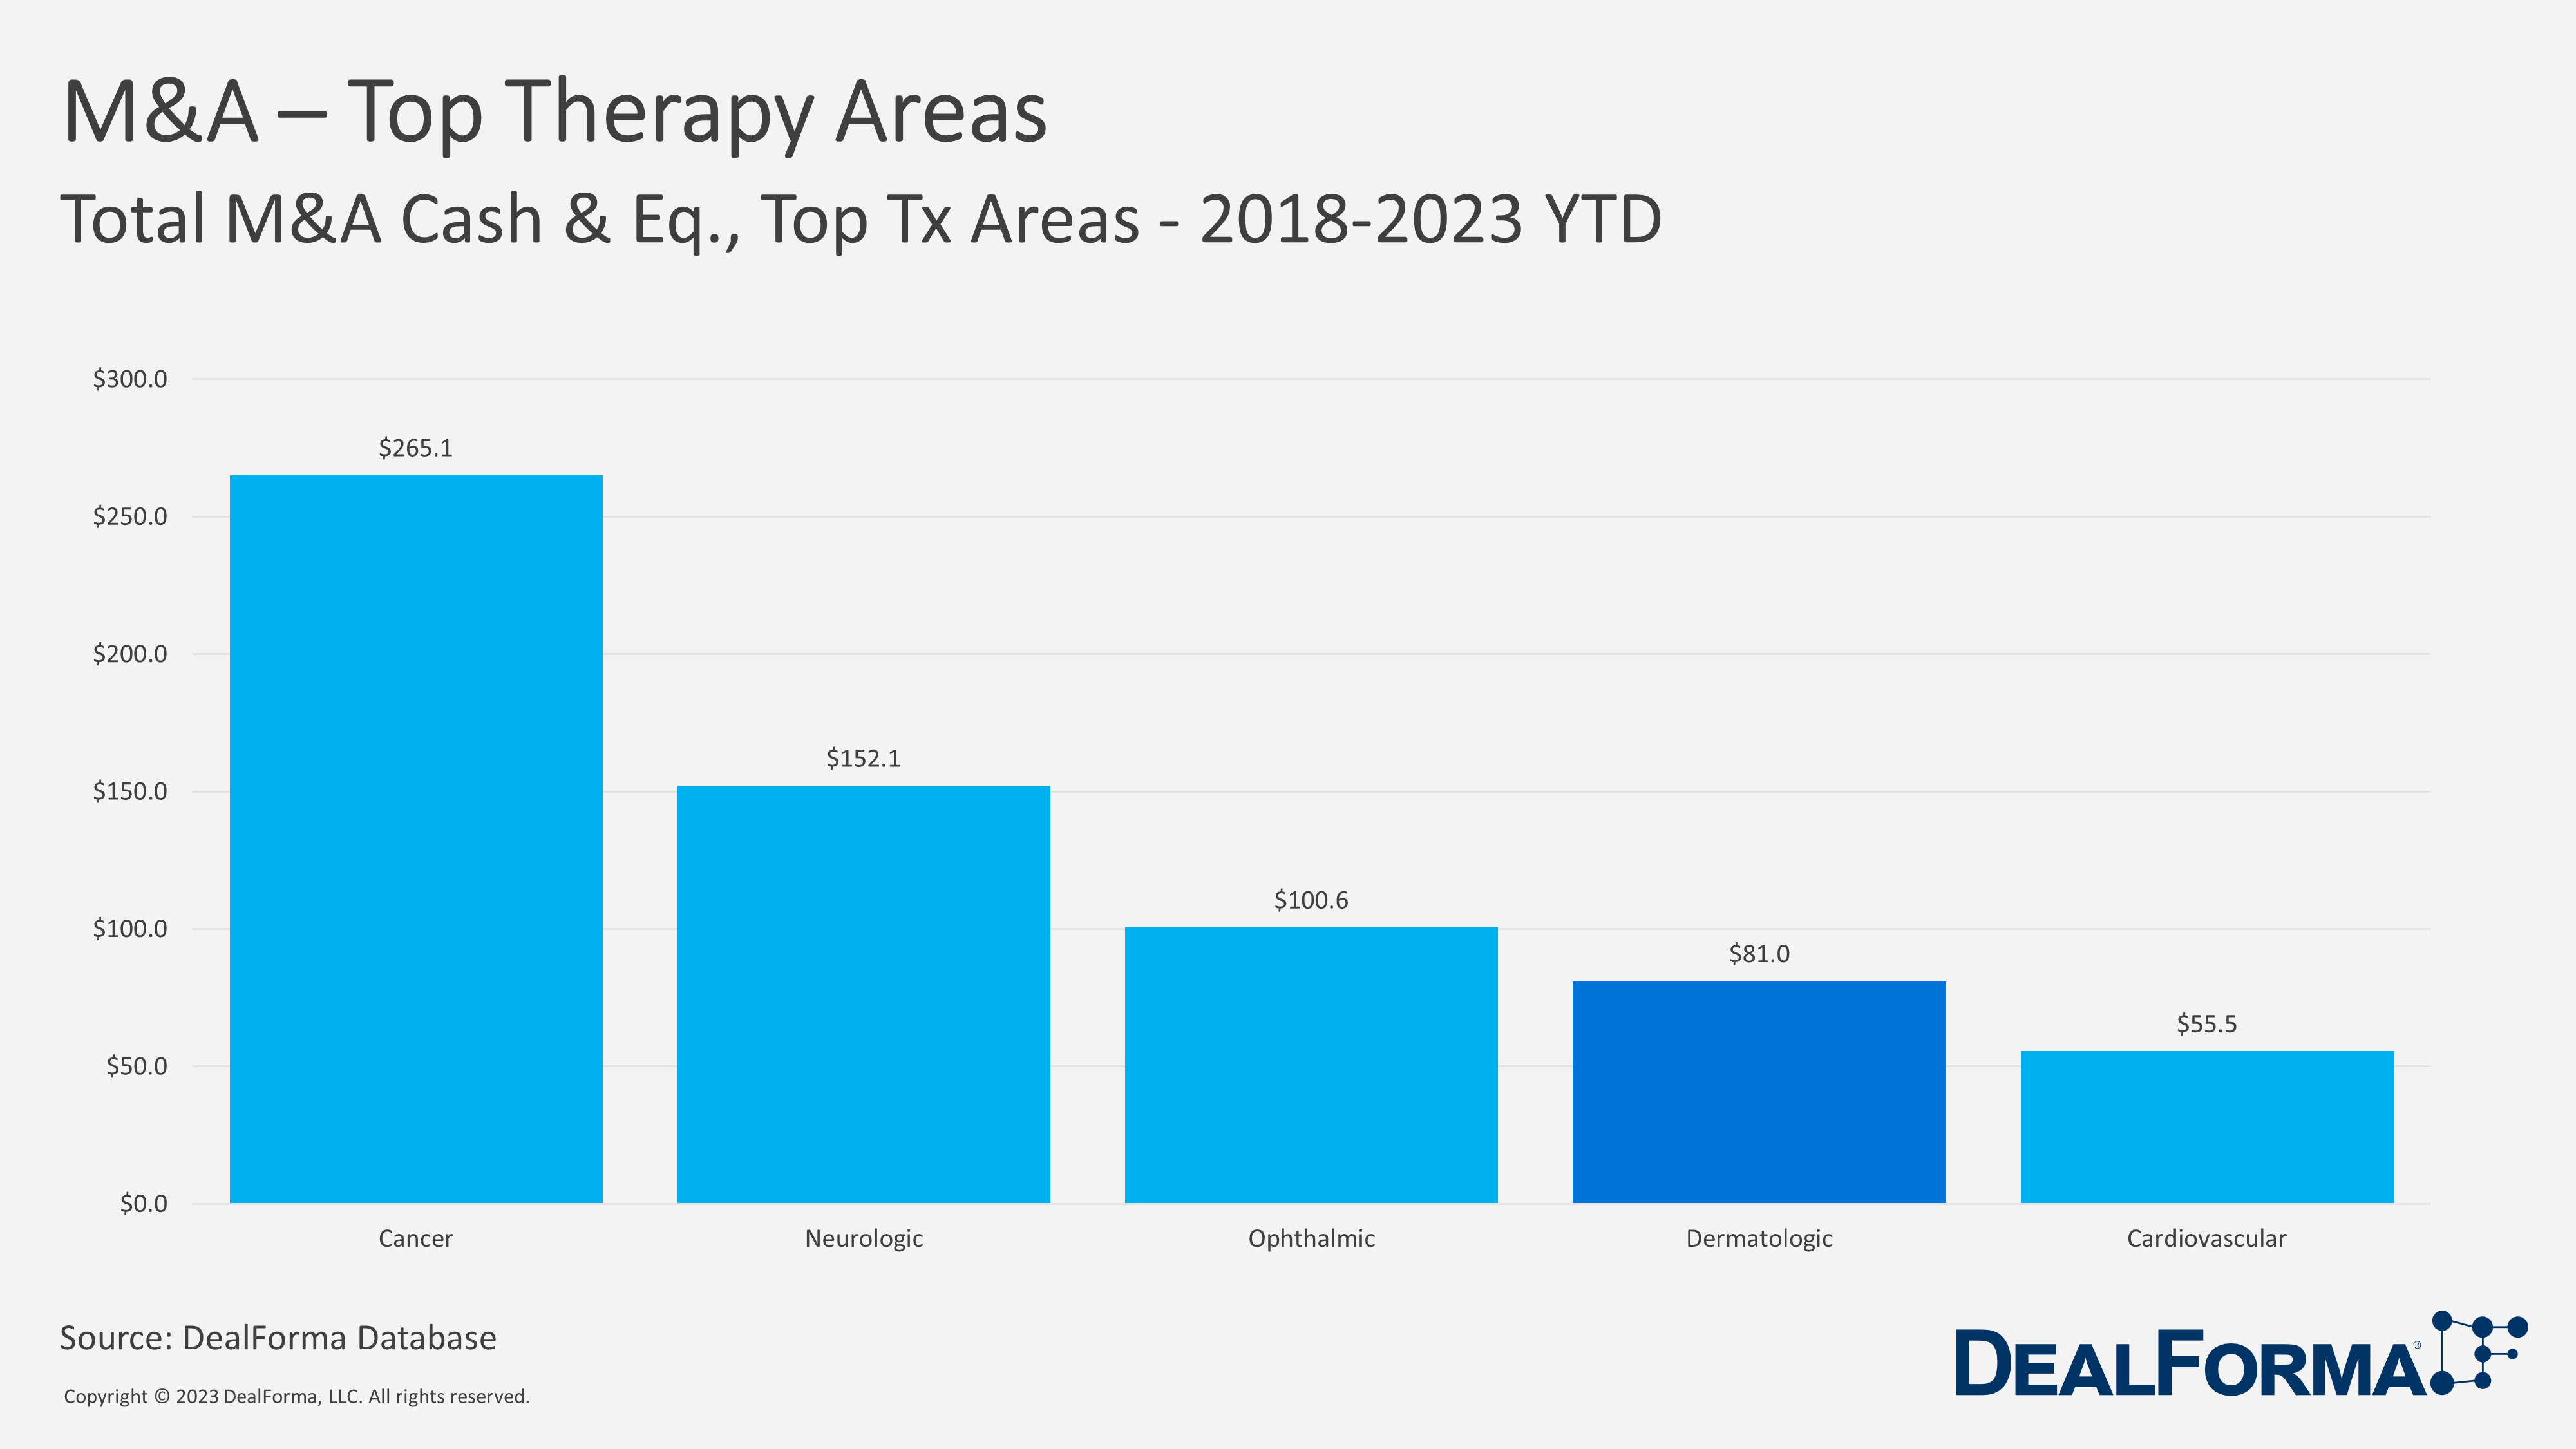 M&A - Top Therapy Areas. Total M&A Cash & Eq., Top Tx Areas - 2018-2023 YTD